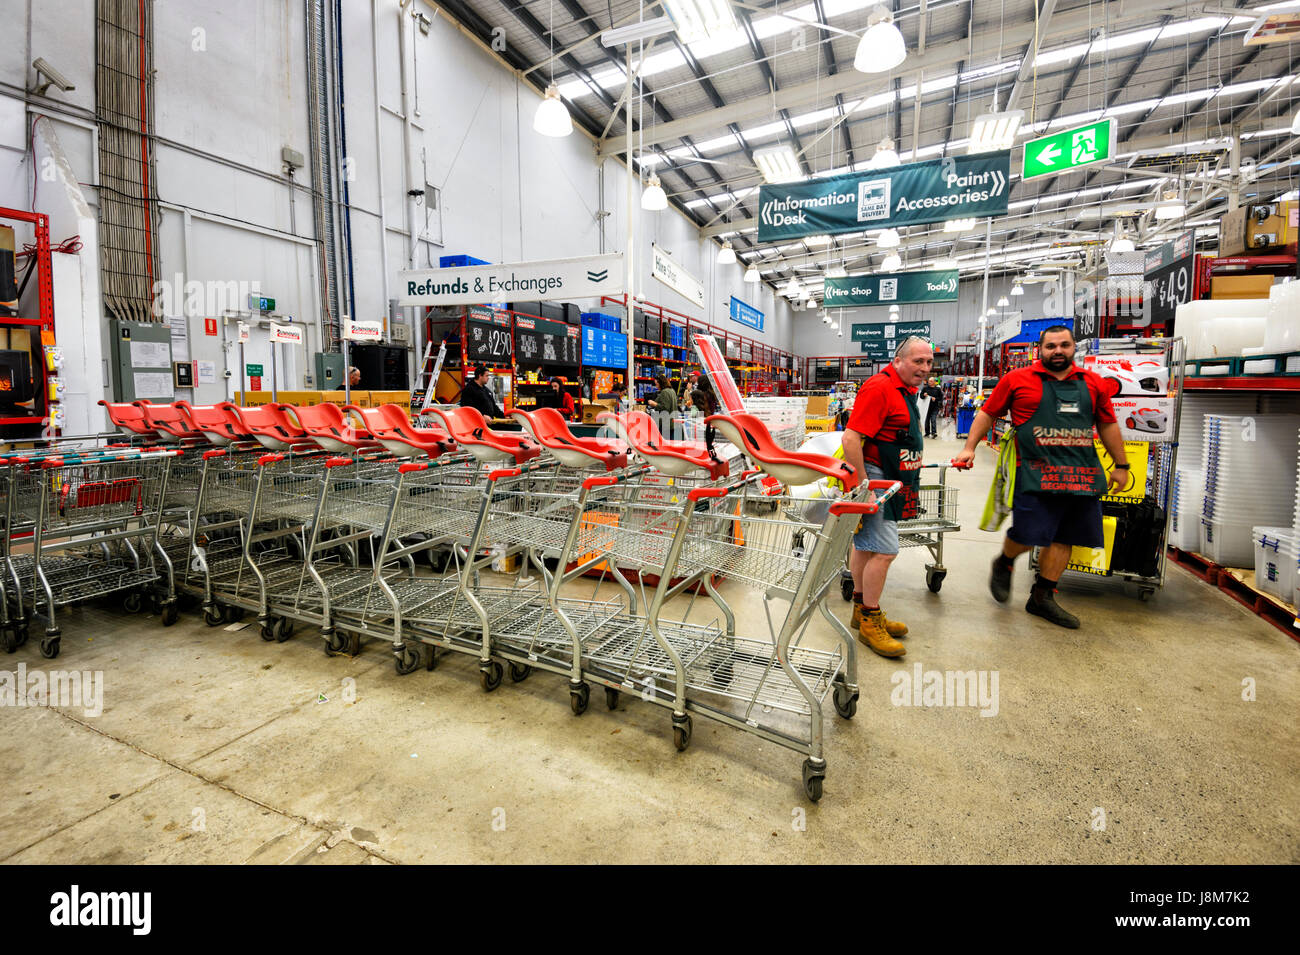 Inside Bunnings Warehouse, home improvements store, Shellharbour, New South Wales, NSW, Australia Stock Photo